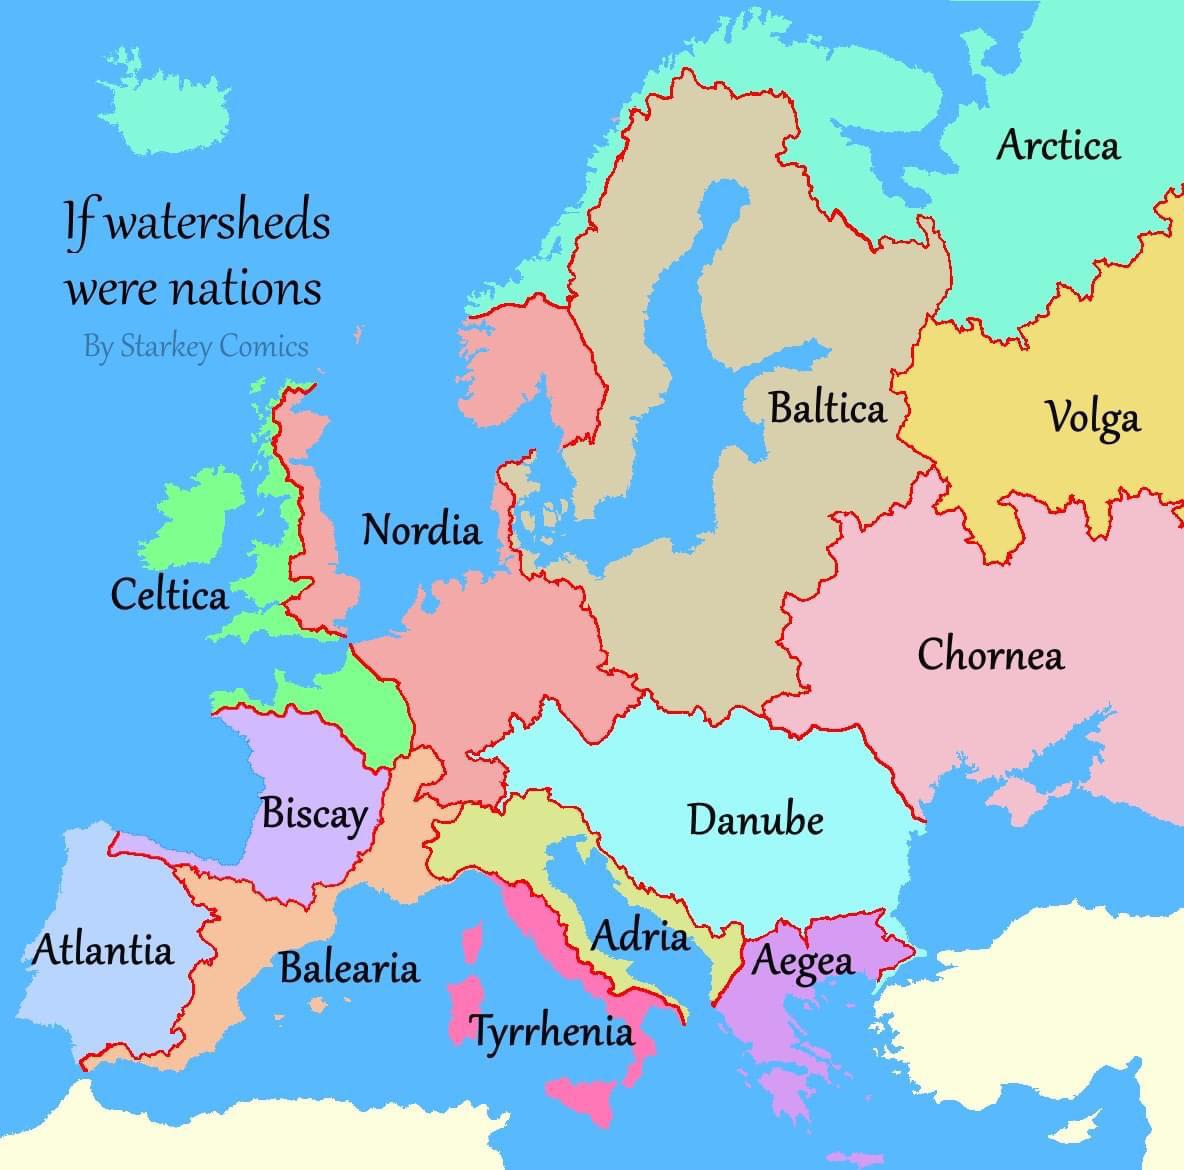 If watersheds were nations, Europe edition